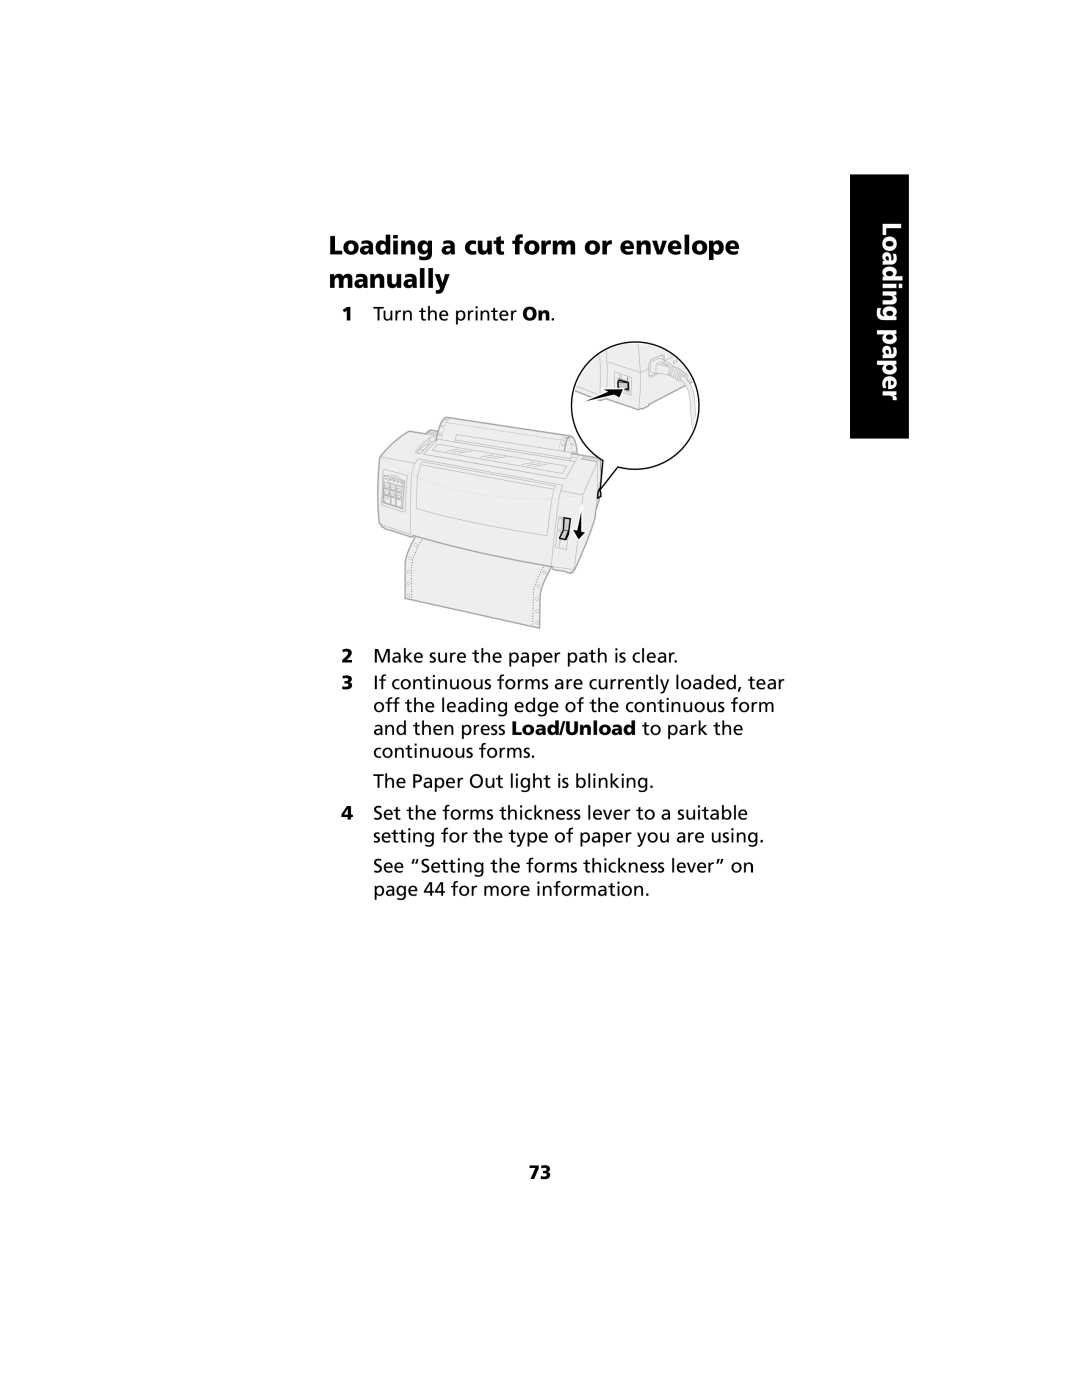 Lexmark 2480 Loading a cut form or envelope manually, Loading paper 